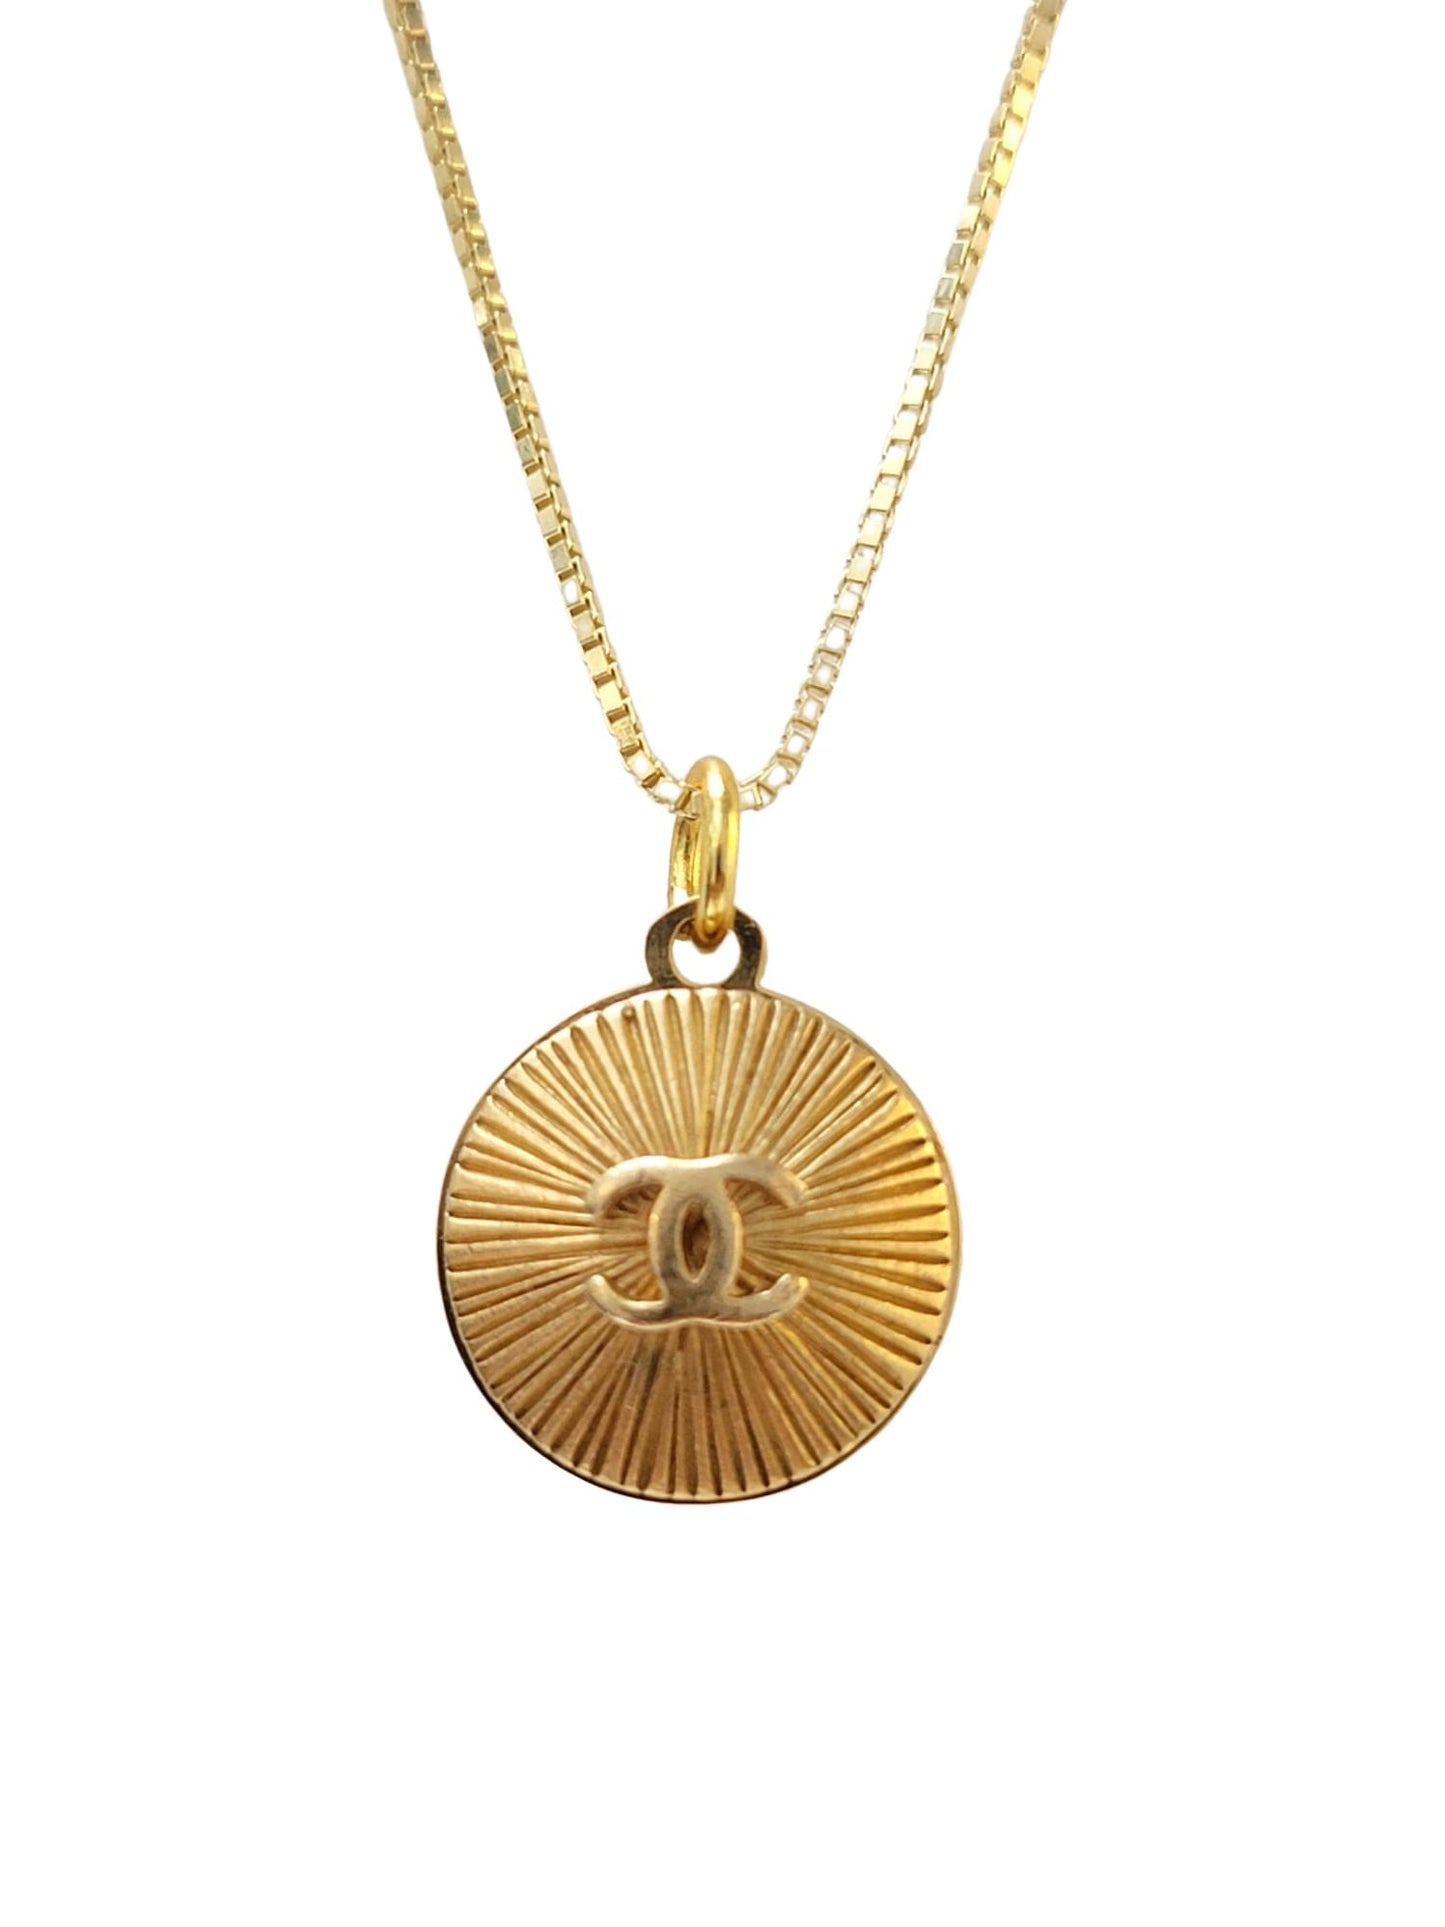 GOLD ON GOLD RAY CHANEL VINTAGE BUTTON NECKLACE